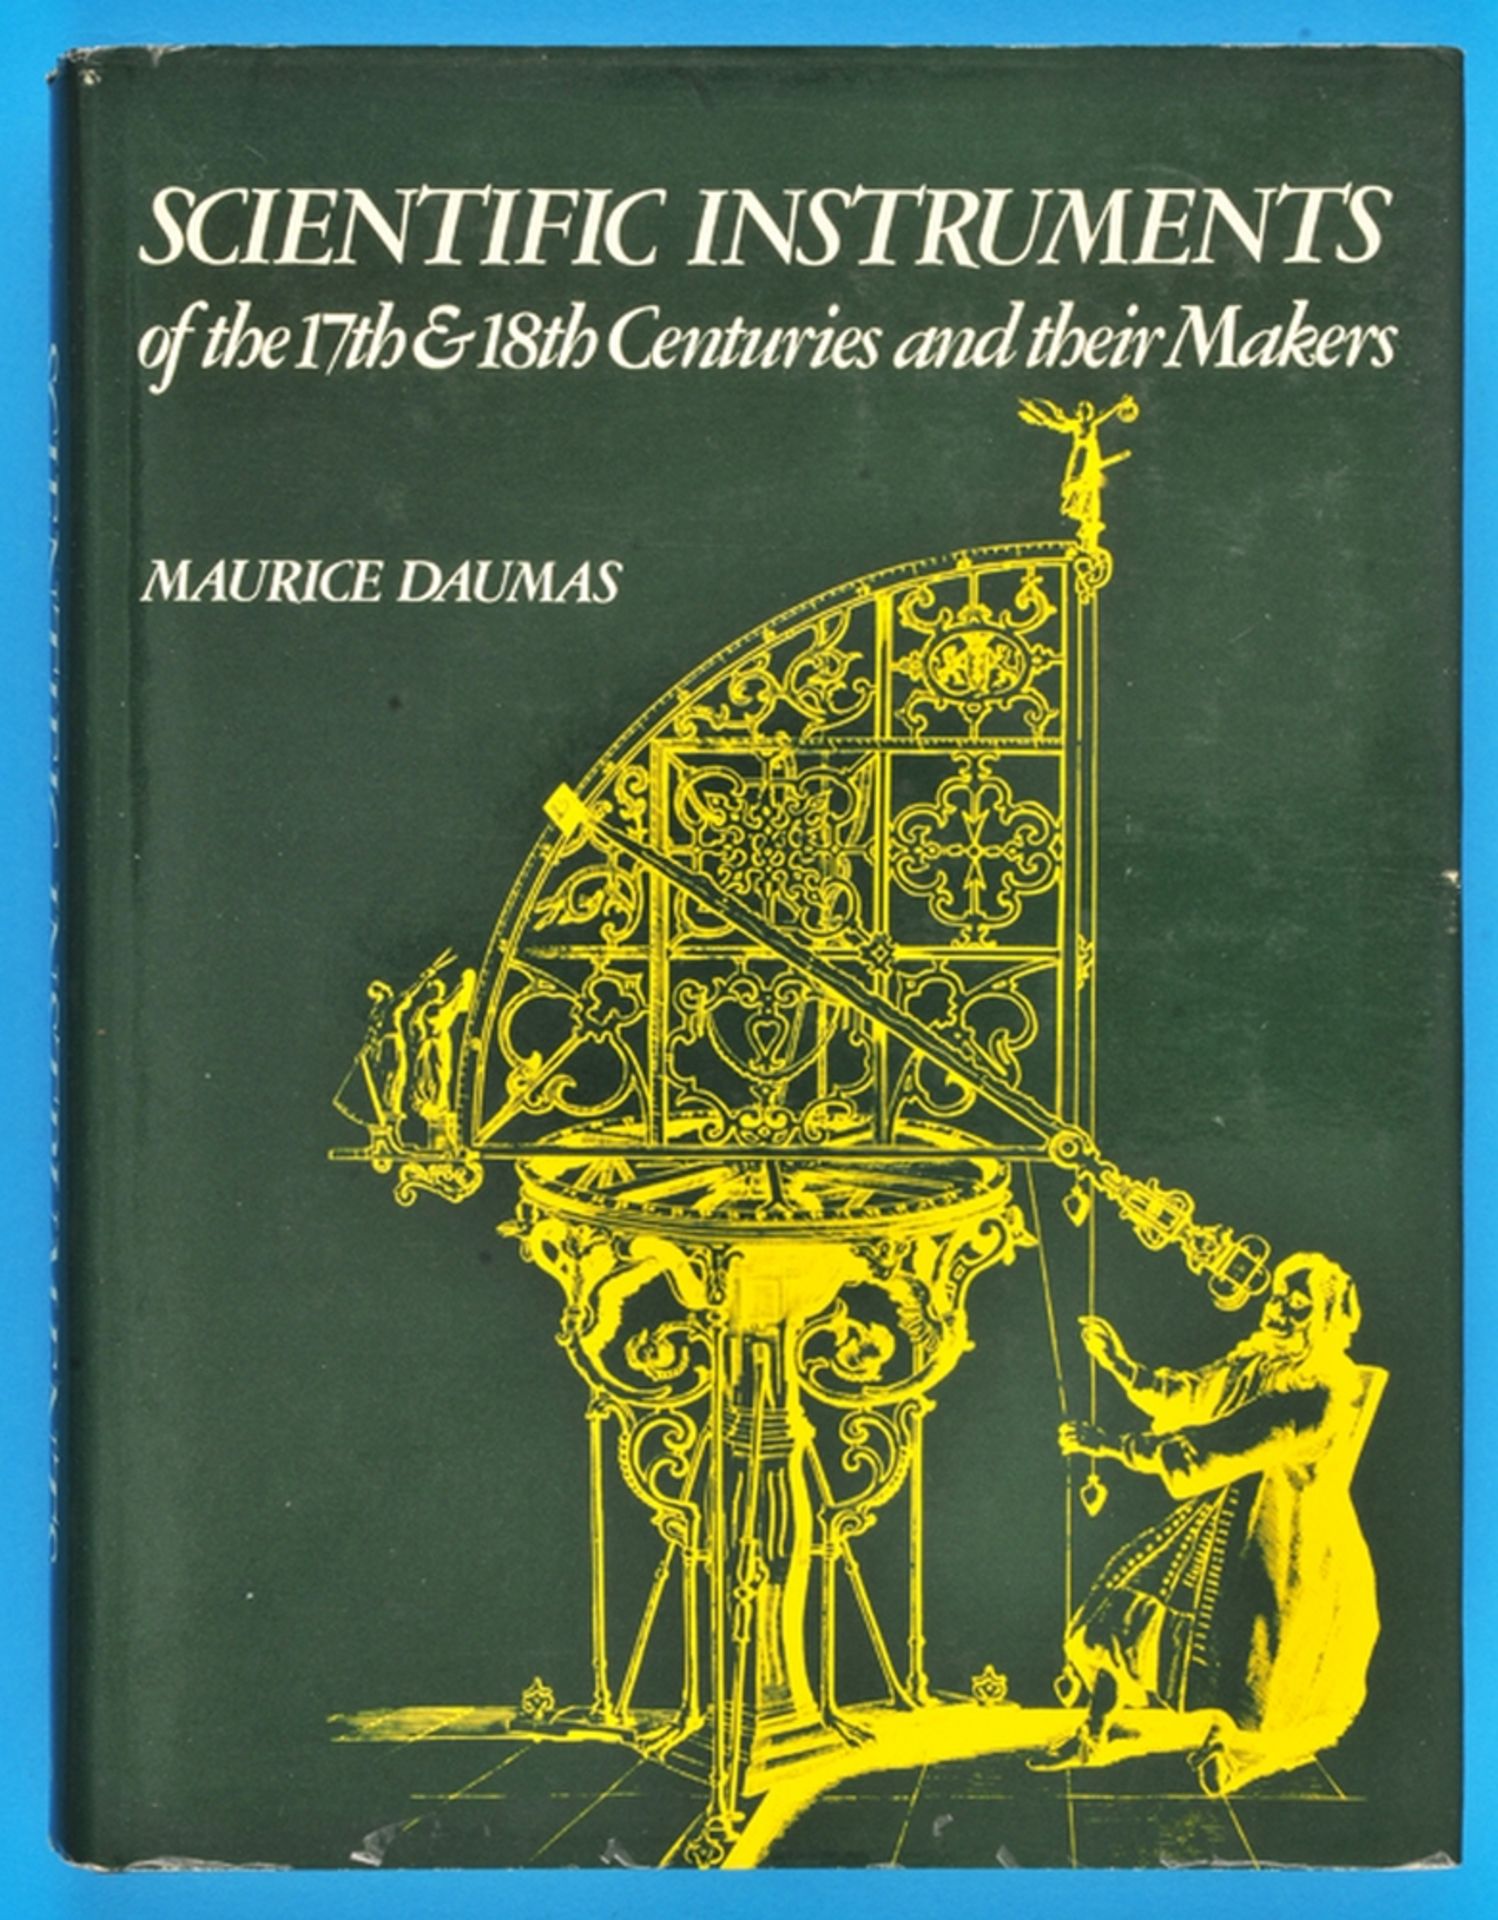 Maurice Daumas, Scientific Instruments of the 17th & 18th Centuries and their Makers, 1972